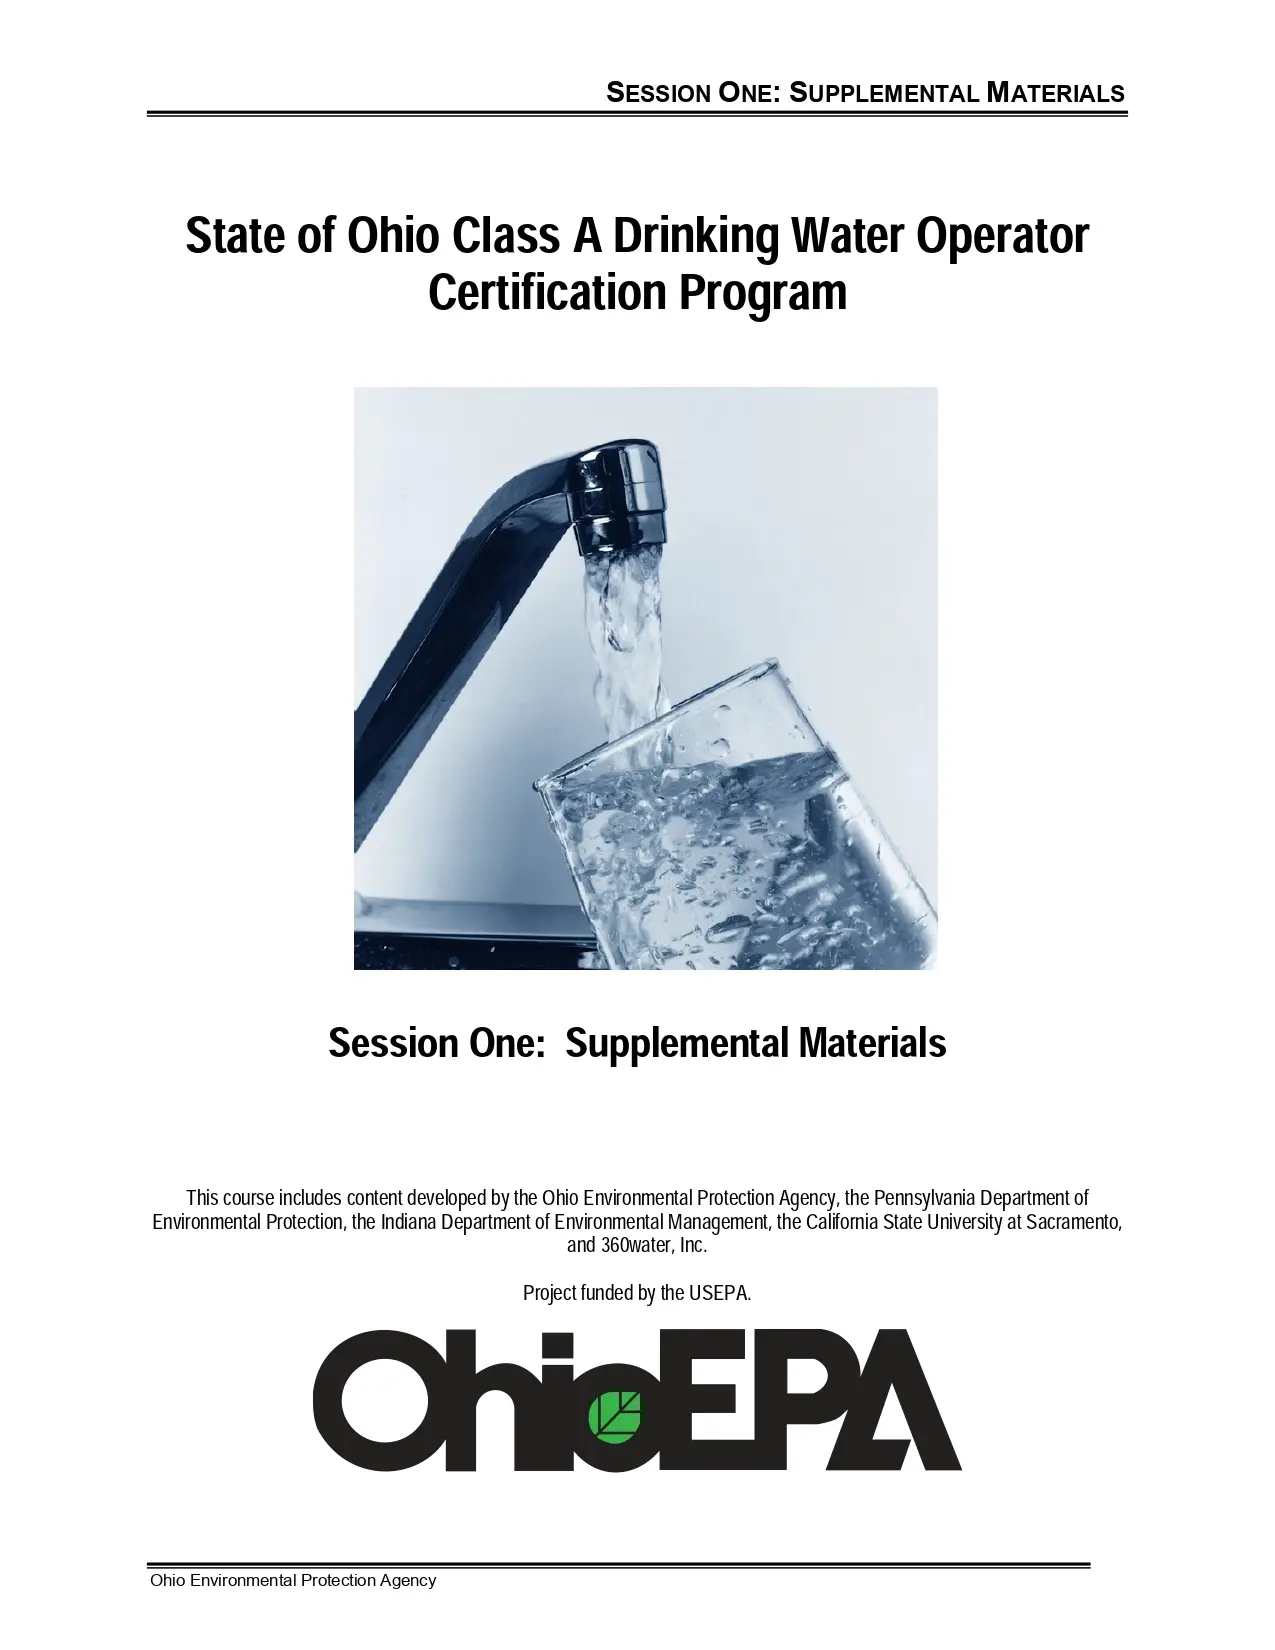 State of Ohio Class A Drinking Water Operator Certification Program